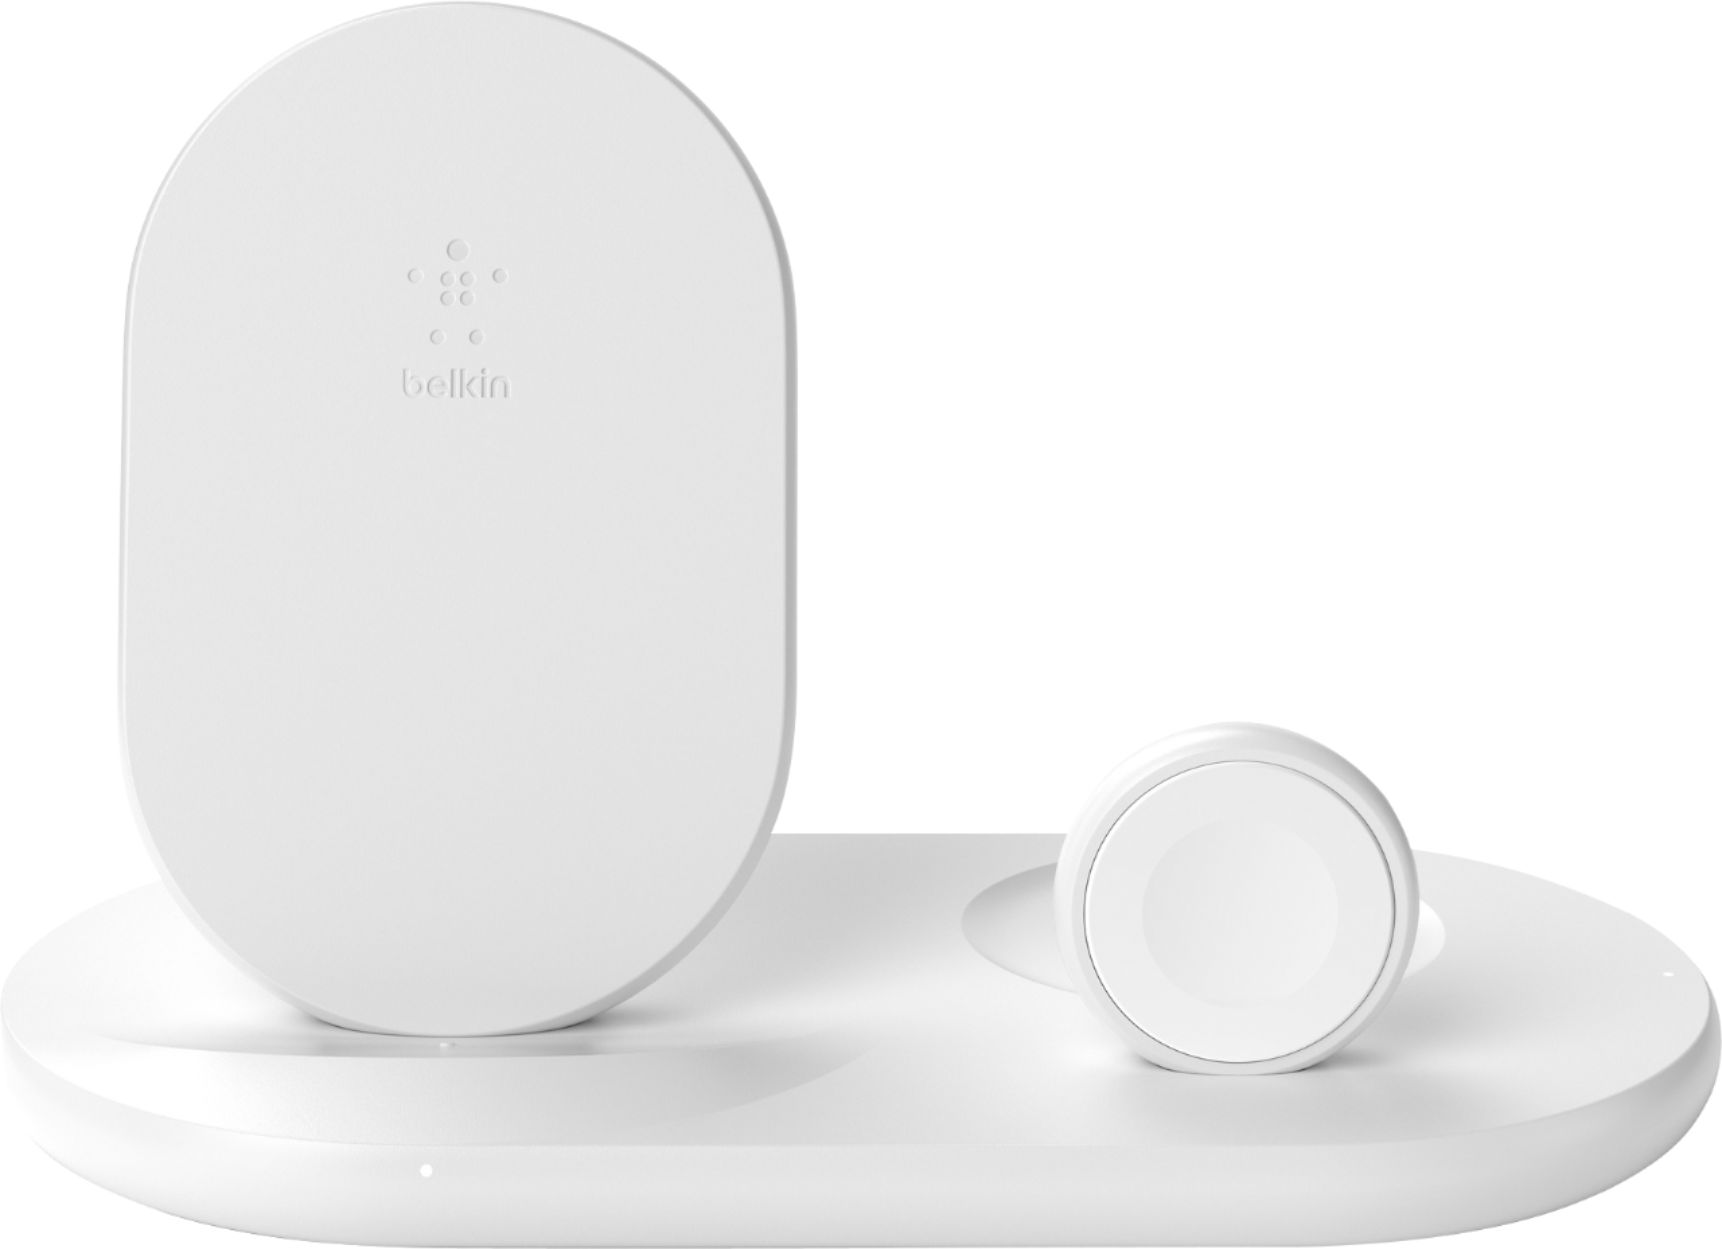 Belkin 3-in-1 Wireless Charger Fast Charging Stand for iPhone 